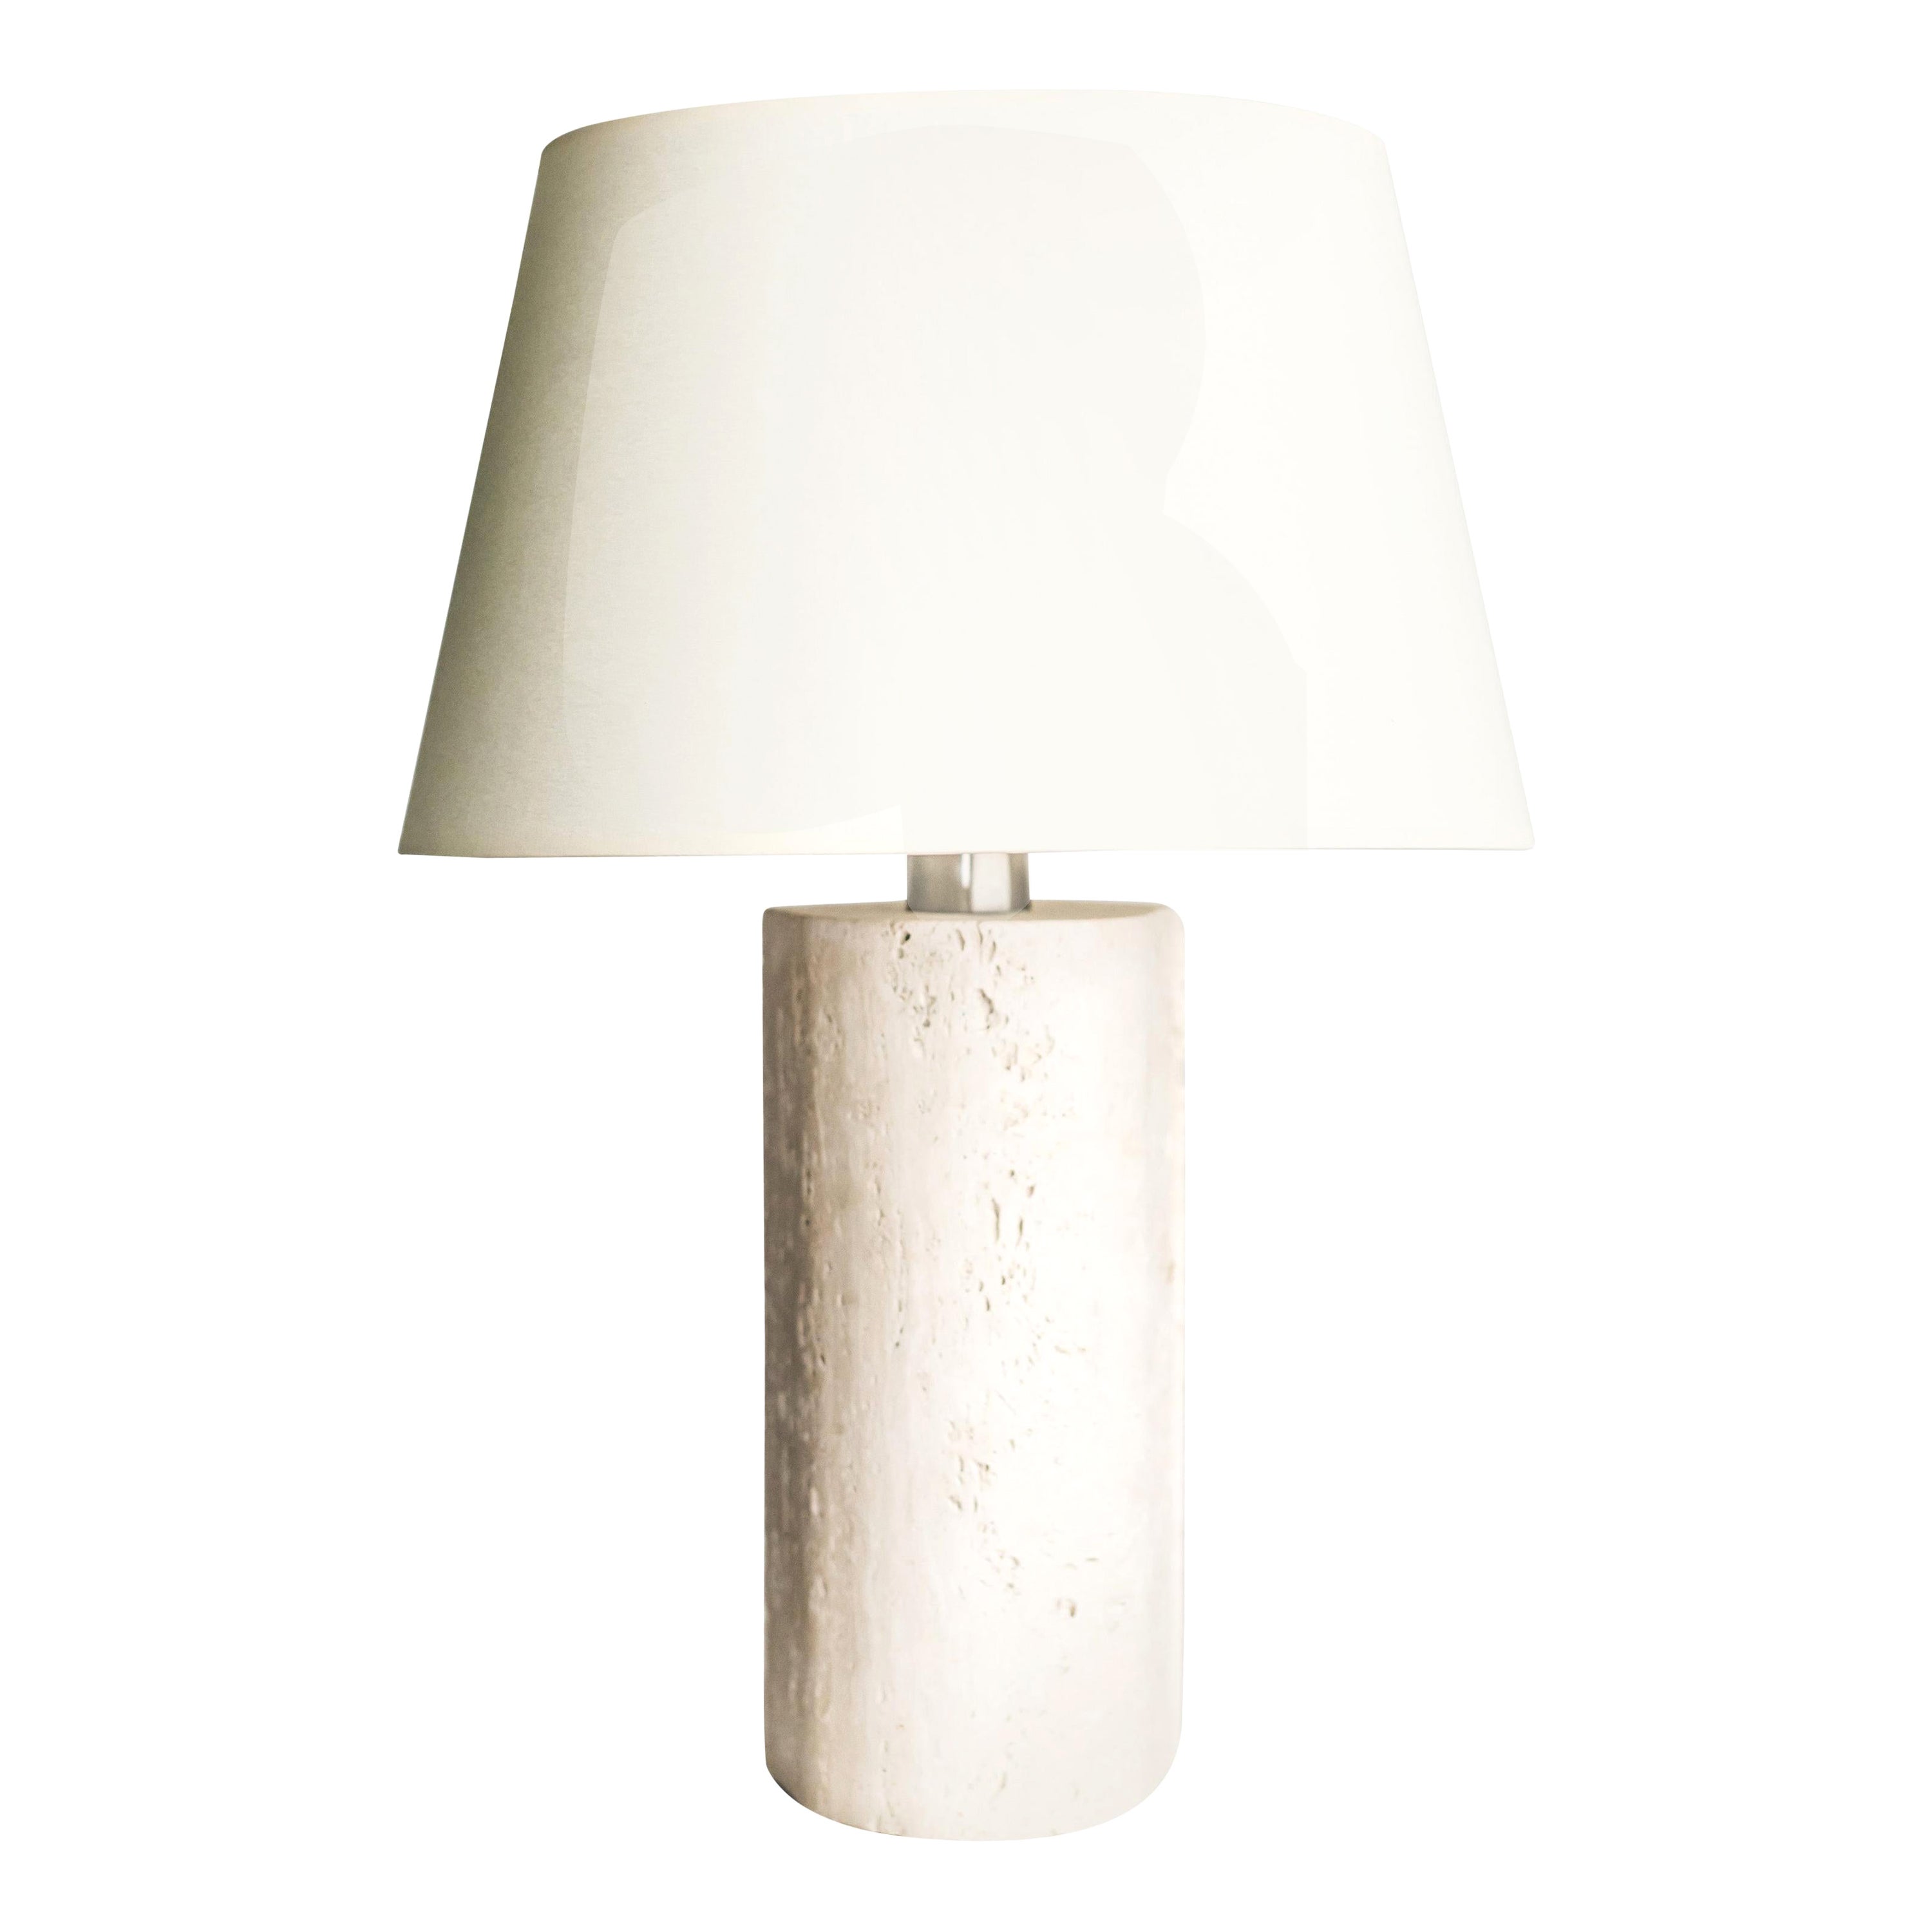 Travertine Sculpted Table Lamp by Brajak Vitberg For Sale